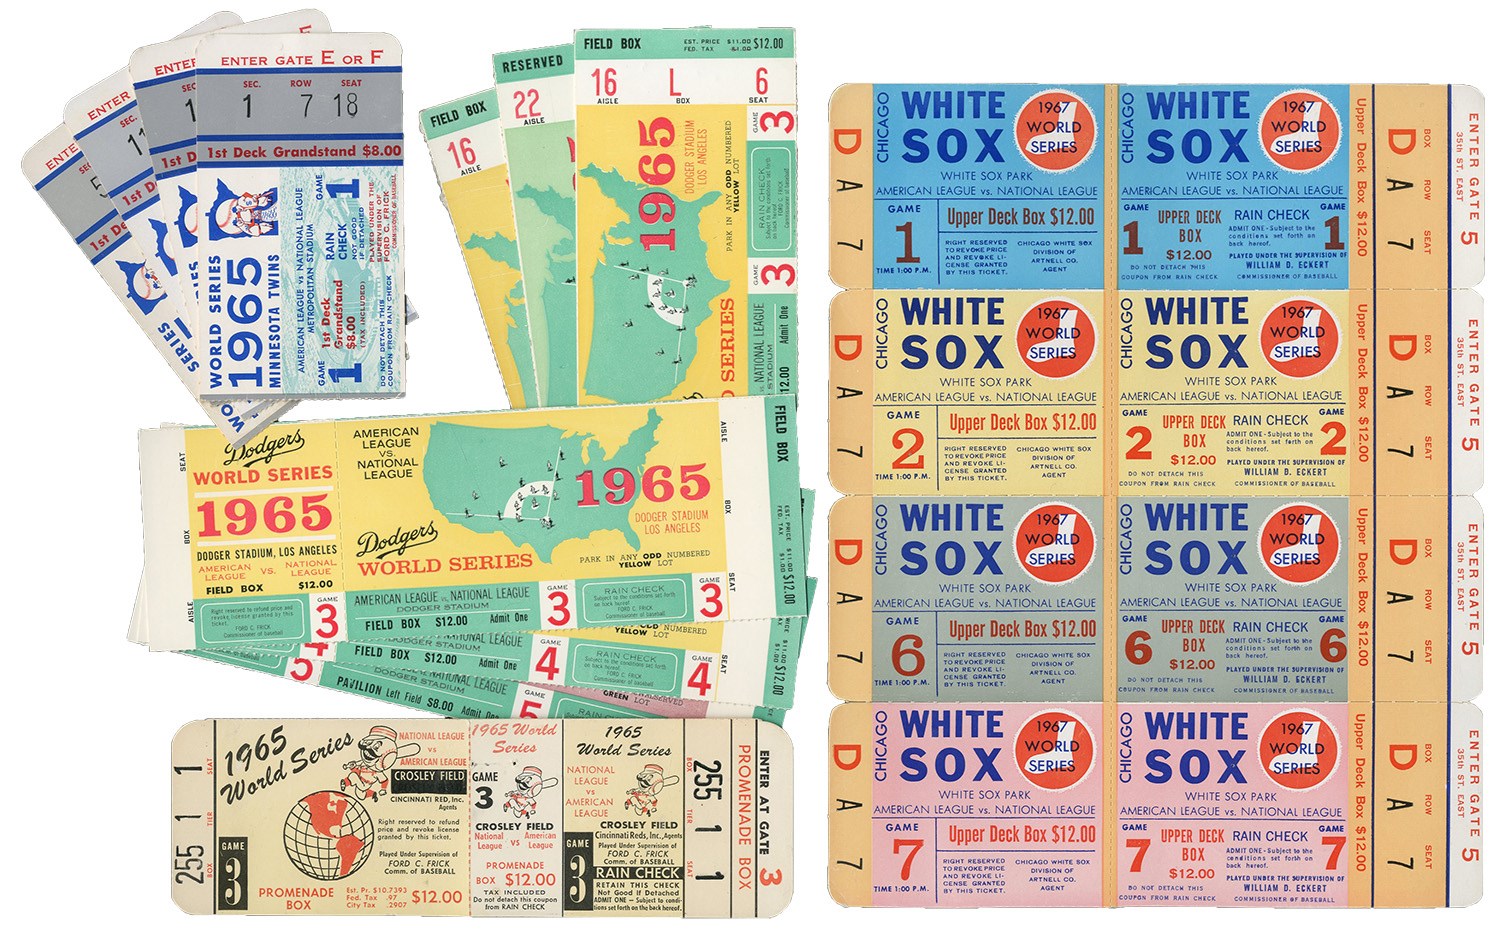 Tickets, Publications & Pins - 1965 & 1967 World Series Ticket Collection of Full Tickets and Stubs (15)